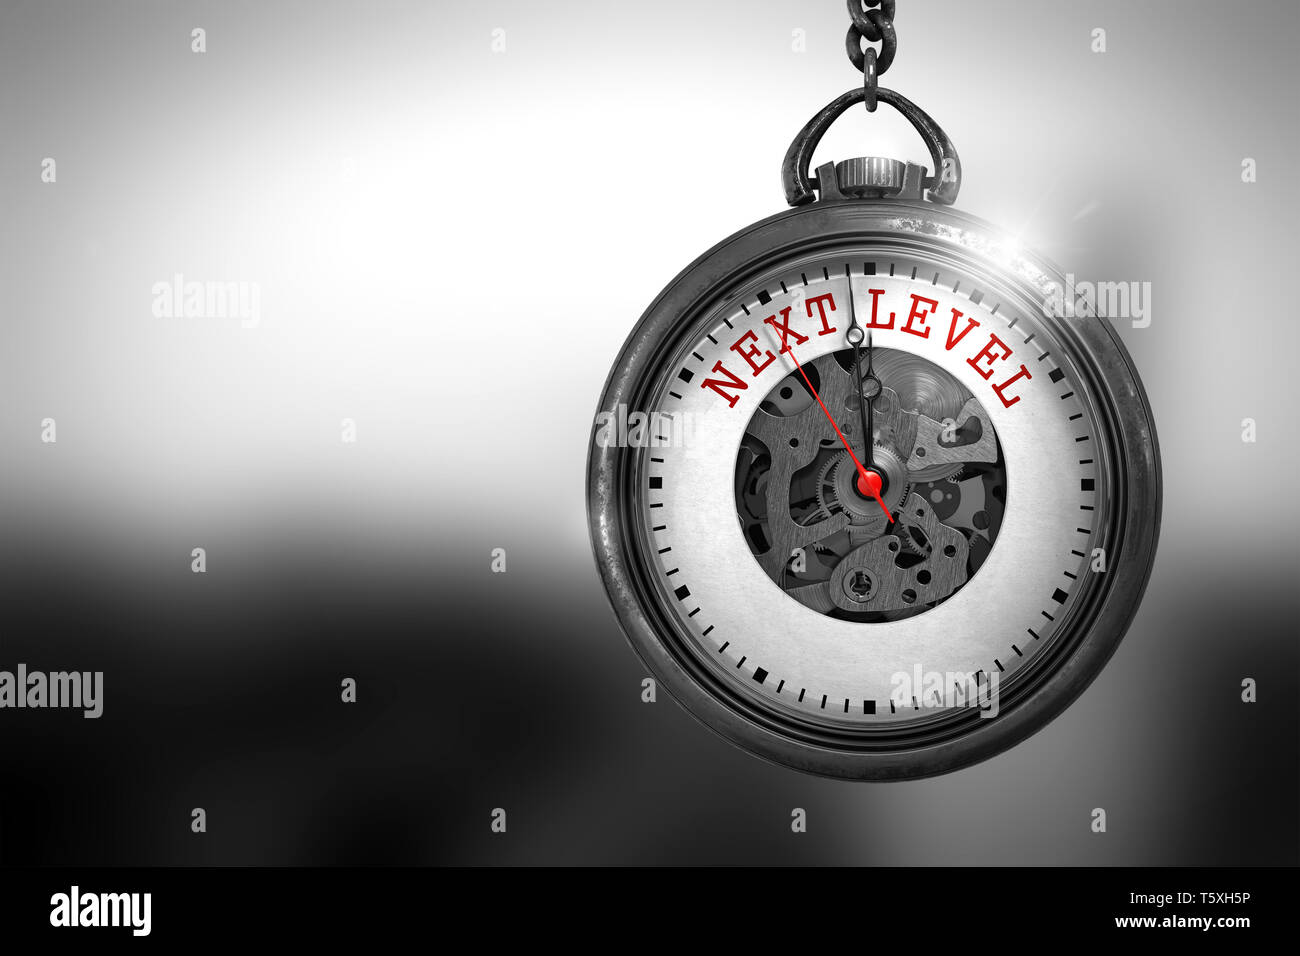 Business Concept: Next Level on Vintage Pocket Watch Face with Close View of Watch Mechanism. Vintage Effect. Watch with Next Level Text on the Face.  Stock Photo